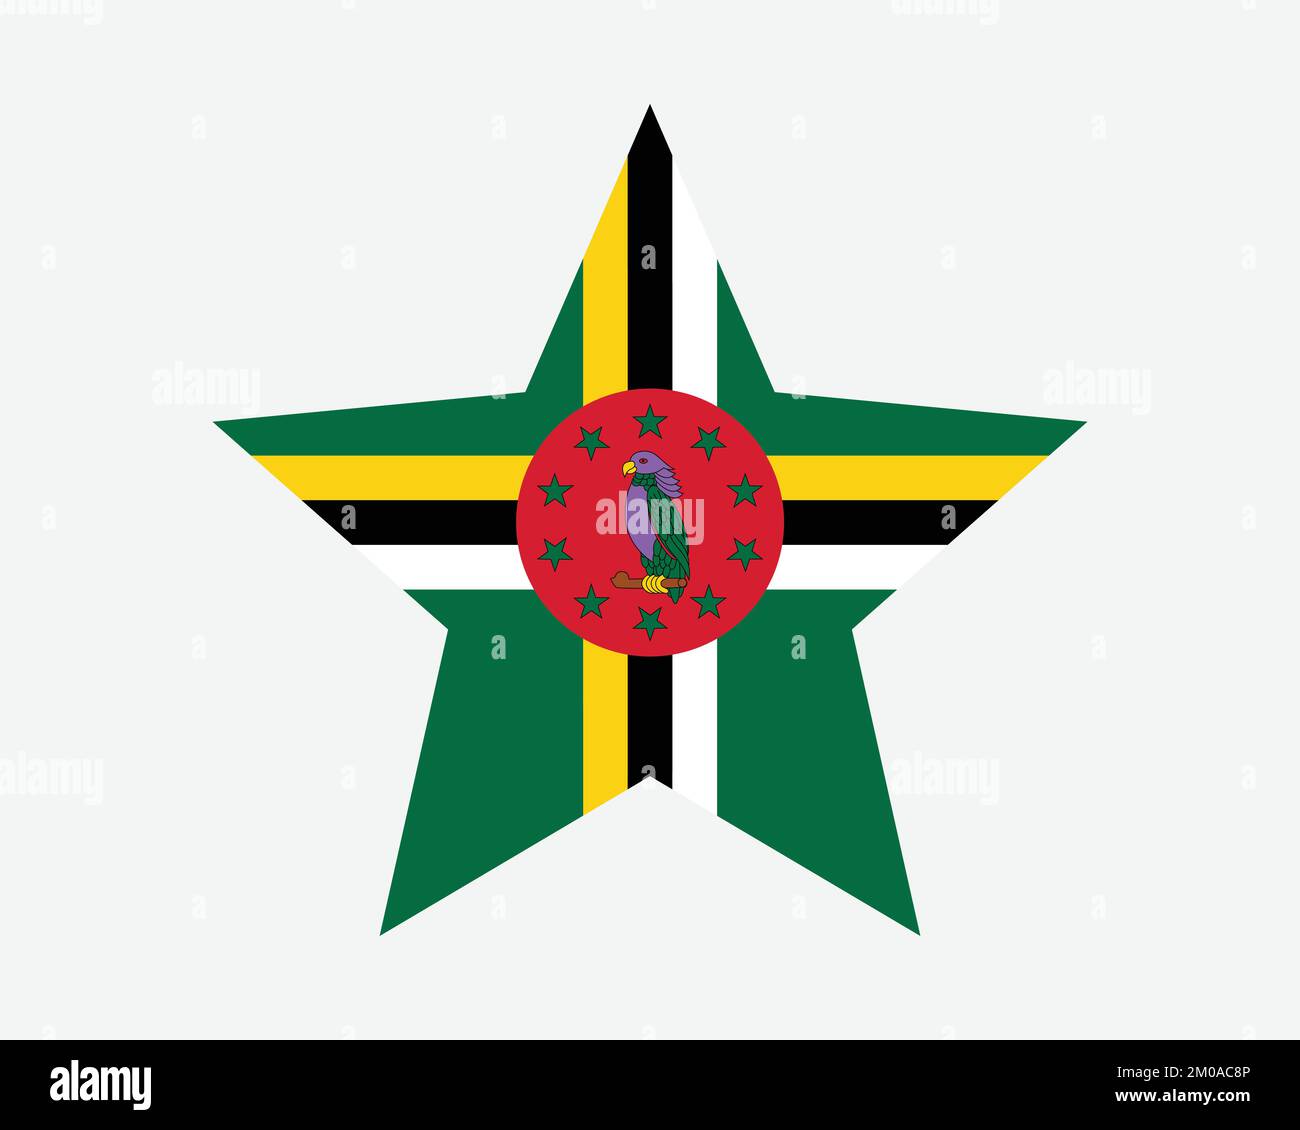 Dominica Star Flag. Dominican Star Shape Flag. Commonwealth of Dominica Country National Banner Icon Symbol Vector Flat Artwork Graphic Illustration Stock Vector